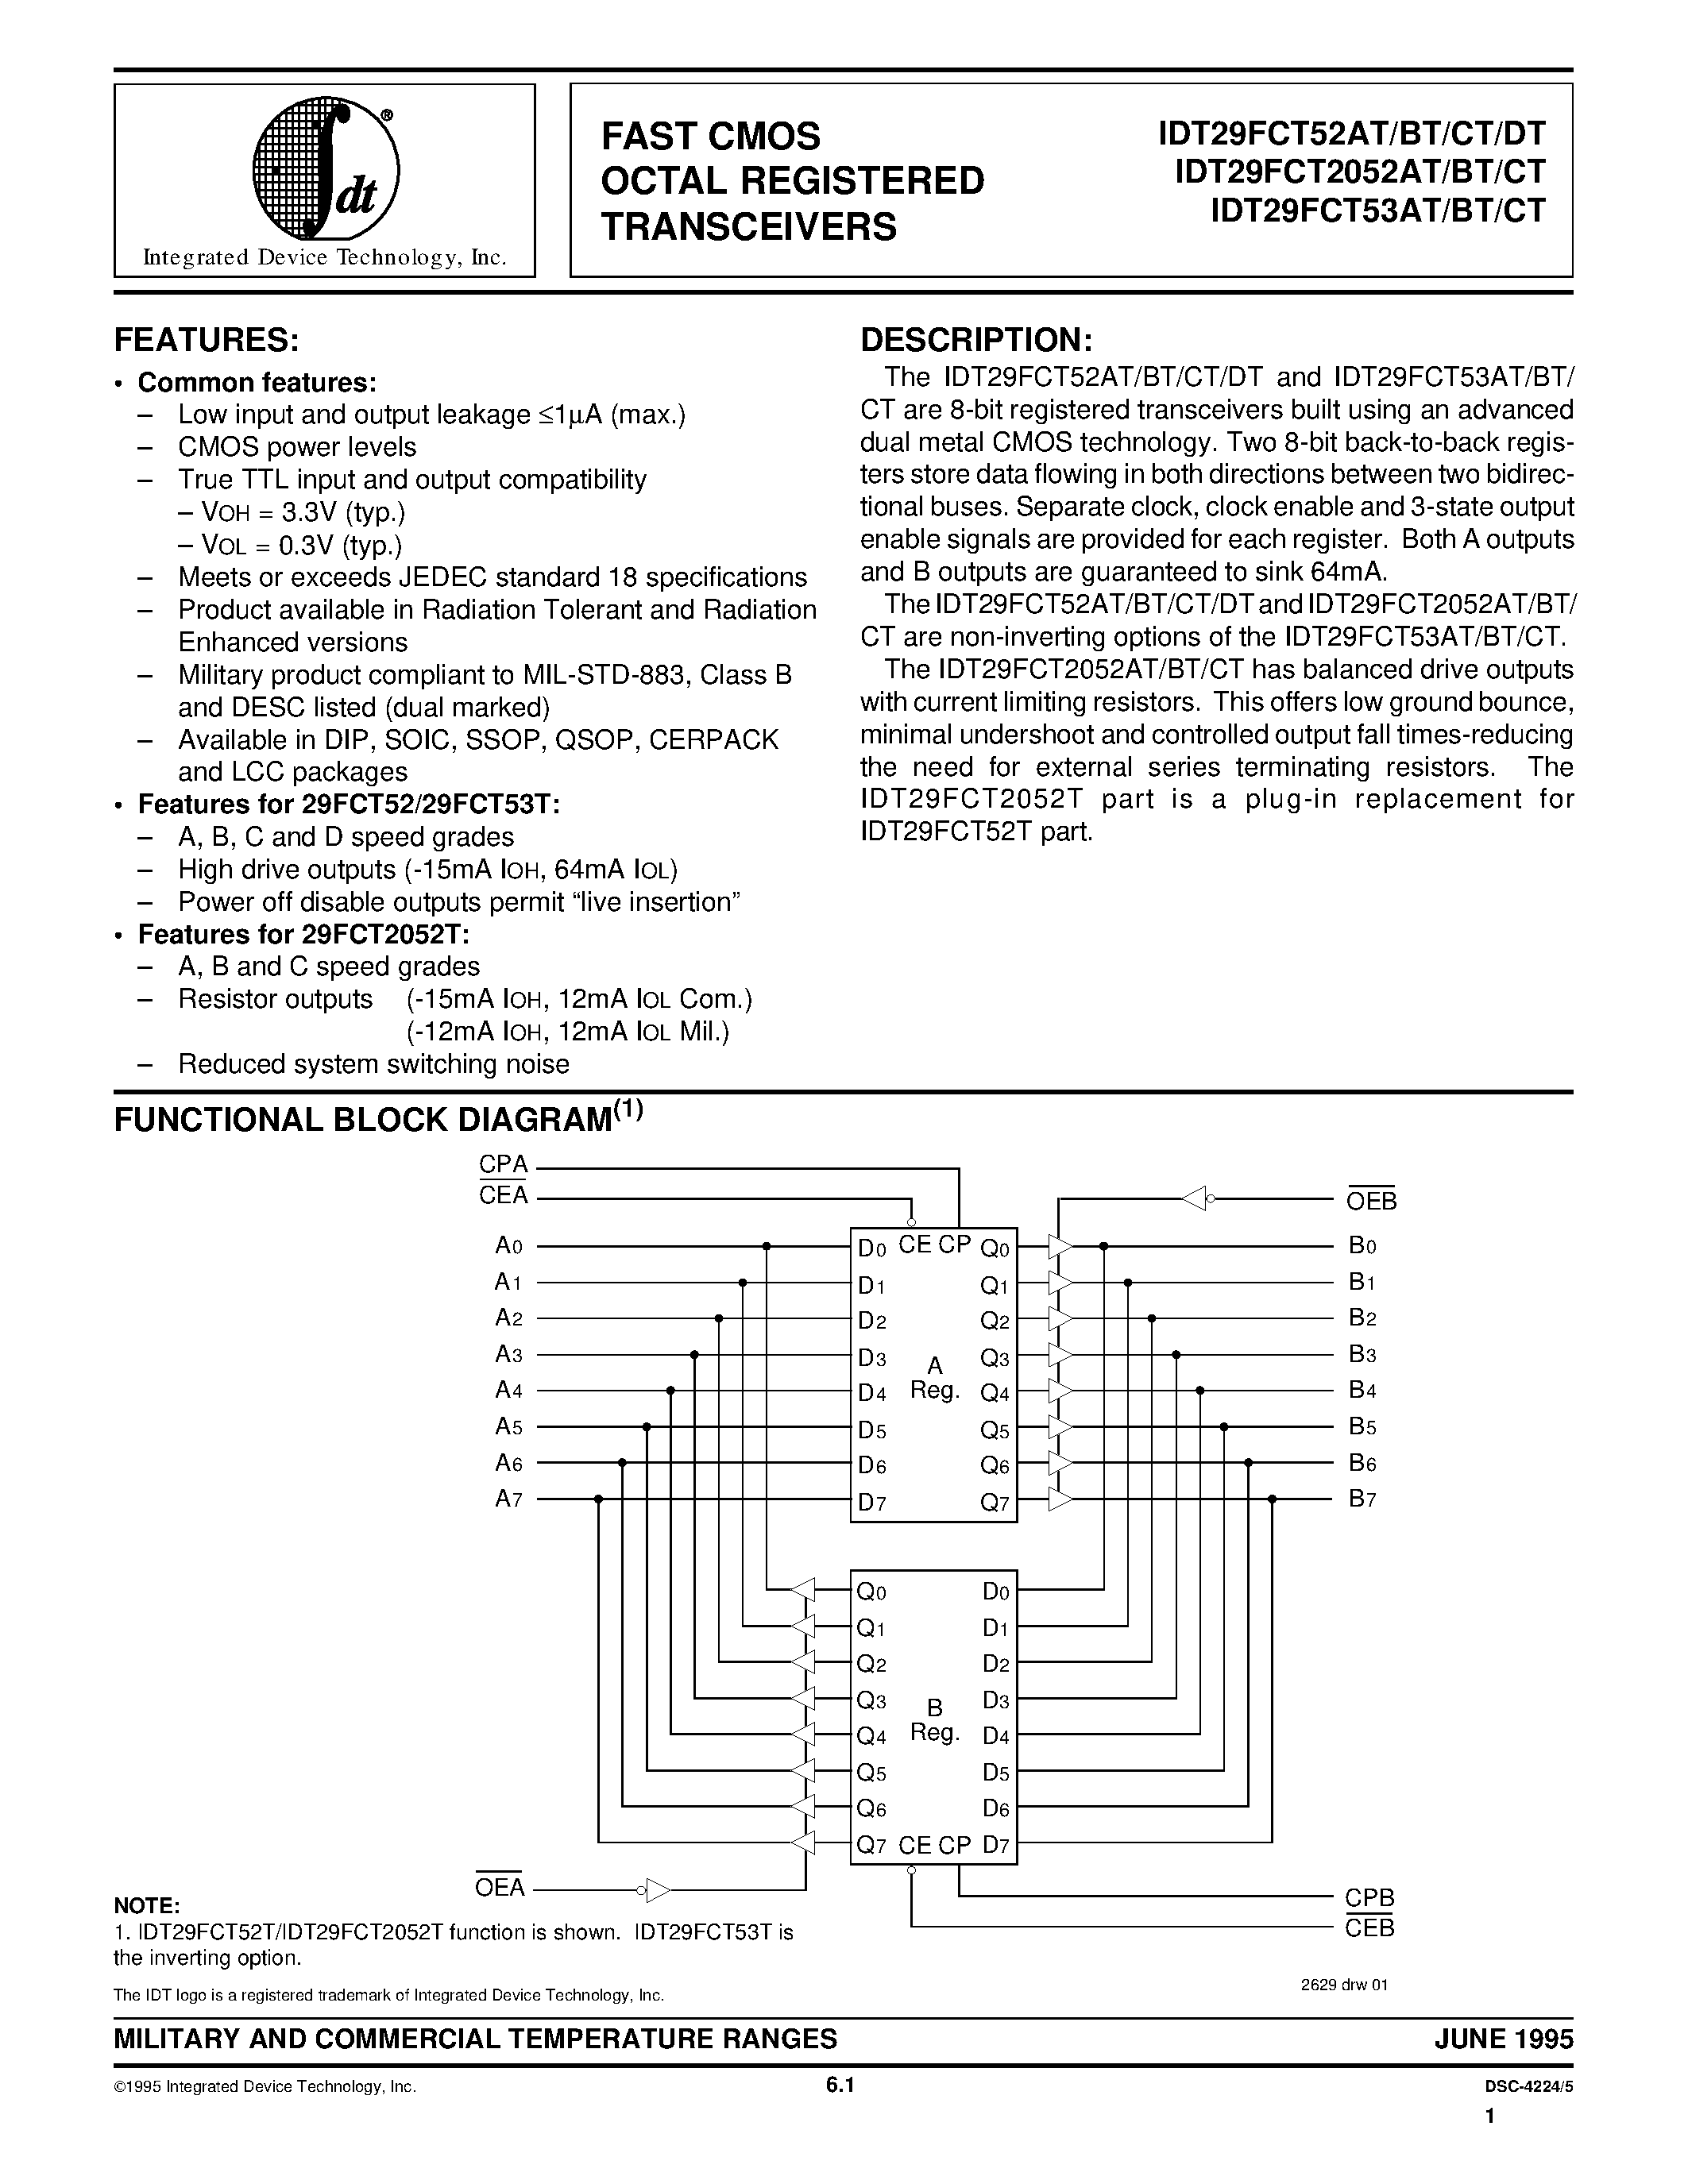 Datasheet 7429FCT53CTL - FAST CMOS OCTAL REGISTERED TRANSCEIVERS page 1